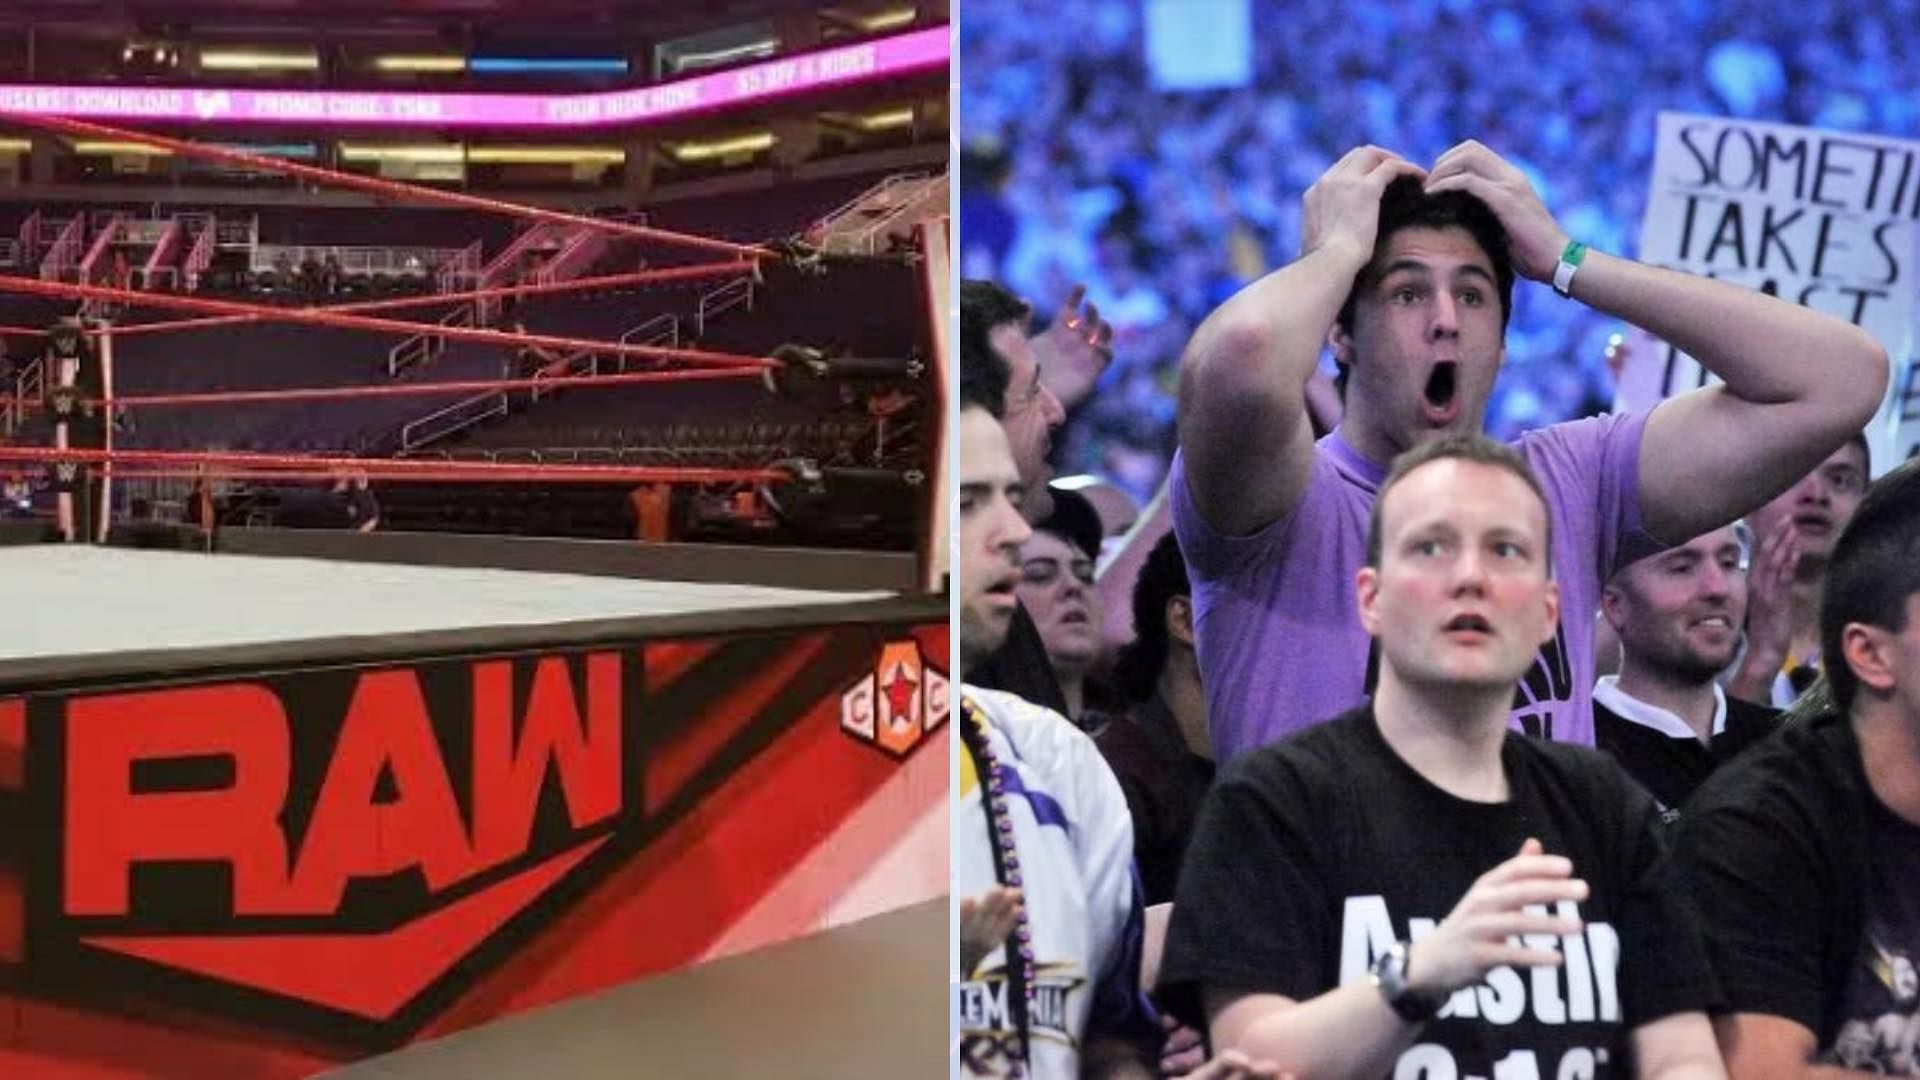 WWE RAW this week was live from the Van Andel Arena in Grand Rapids, Michigan